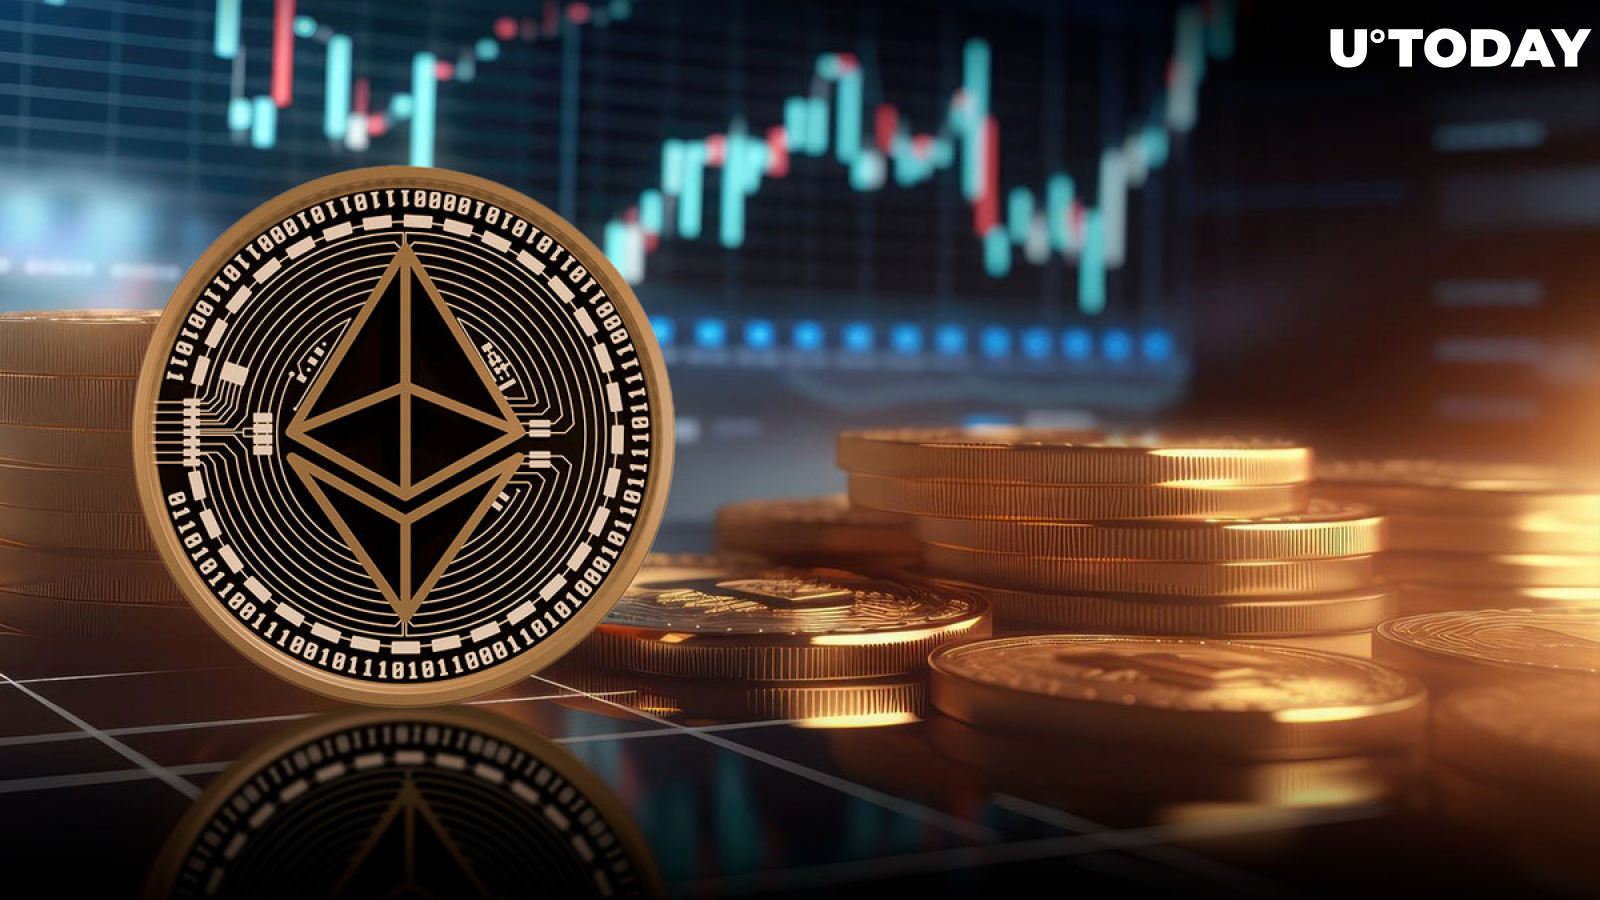 Ethereum (ETH) Finally Breaks Crucial $3,000 Resistance, What Comes Next?